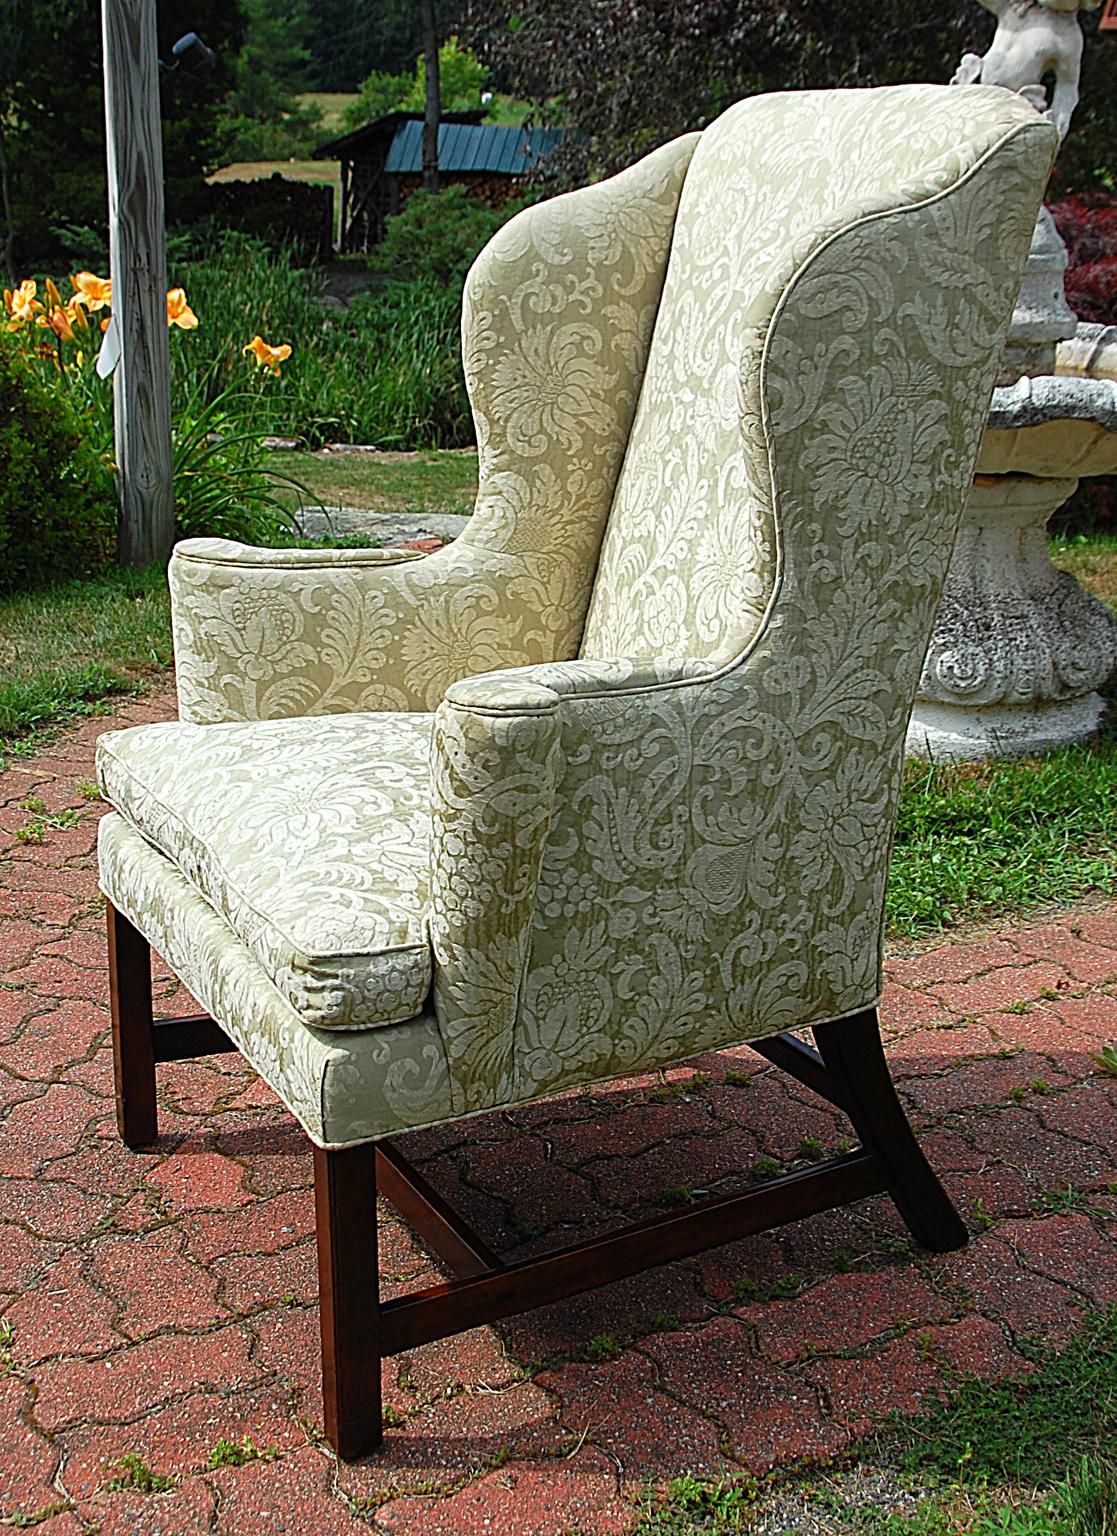 English Georgian period Chippendale mahogany wing chair with square molded legs. This particularly stylish wing chair has an H-stretcher, out swept arms, shaped tall back, serpentine shaped wings, loose cushion. The
roll of the out swept arms and